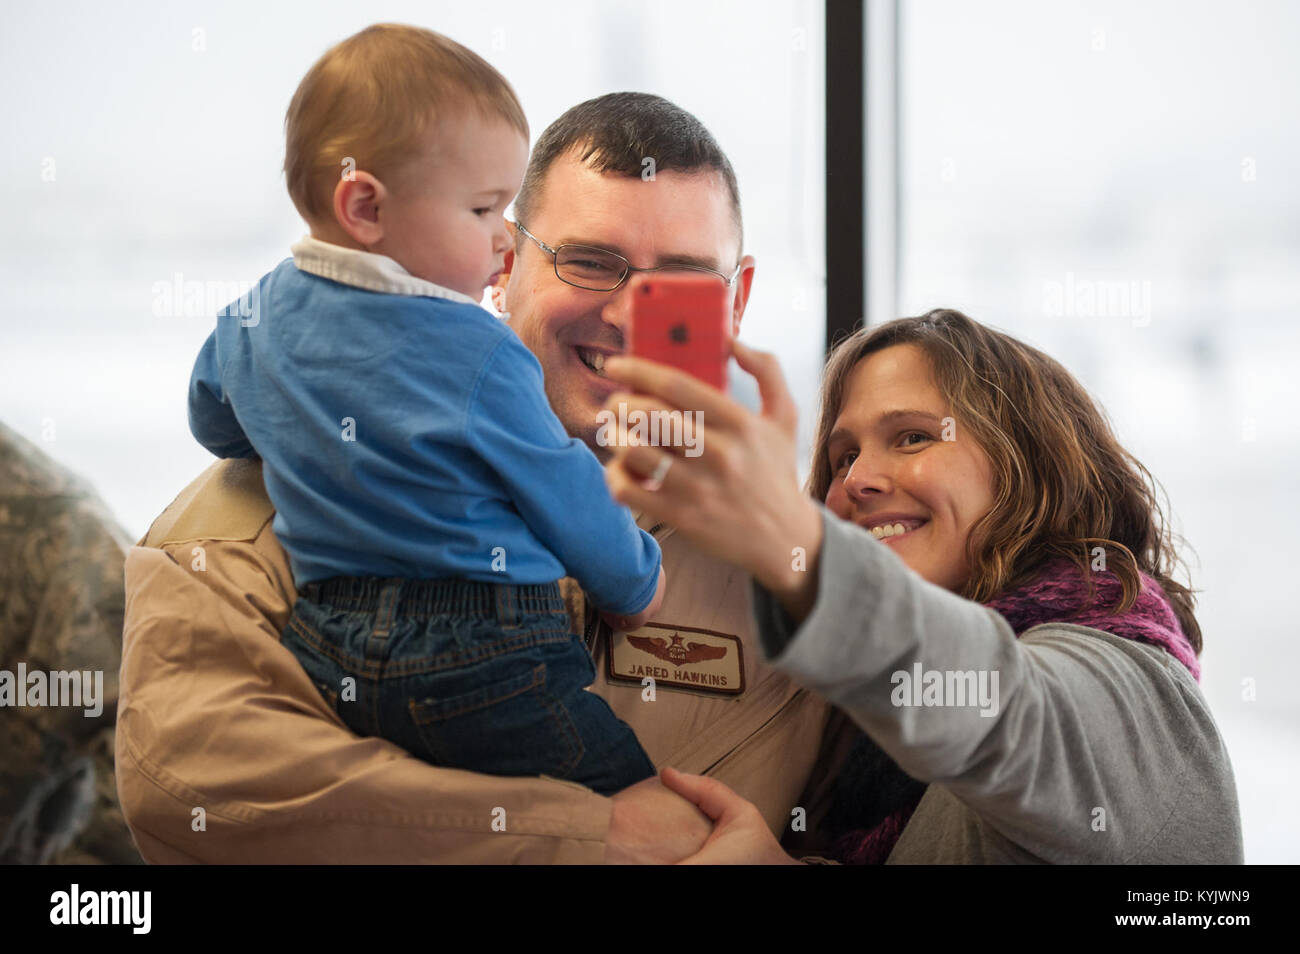 Maj. Jared Hawkins, a C-130 Hercules navigator in the 123rd Airlift Wing, poses for a selfie with his son and wife, Jaime and Lairkin Hawkins, at the Kentucky Air National Guard Base in Louisville, Ky., Feb. 21, 2015. Hawkins is deploying to the Persian Gulf in support of Operation Freedom's Sentinel, during which more than 110 members of the Kentucky Air Guard will fly troops and cargo across the U.S. Central Command Area of Responsibility. (U.S. Air National Guard photo by Maj. Dale Greer) Stock Photo